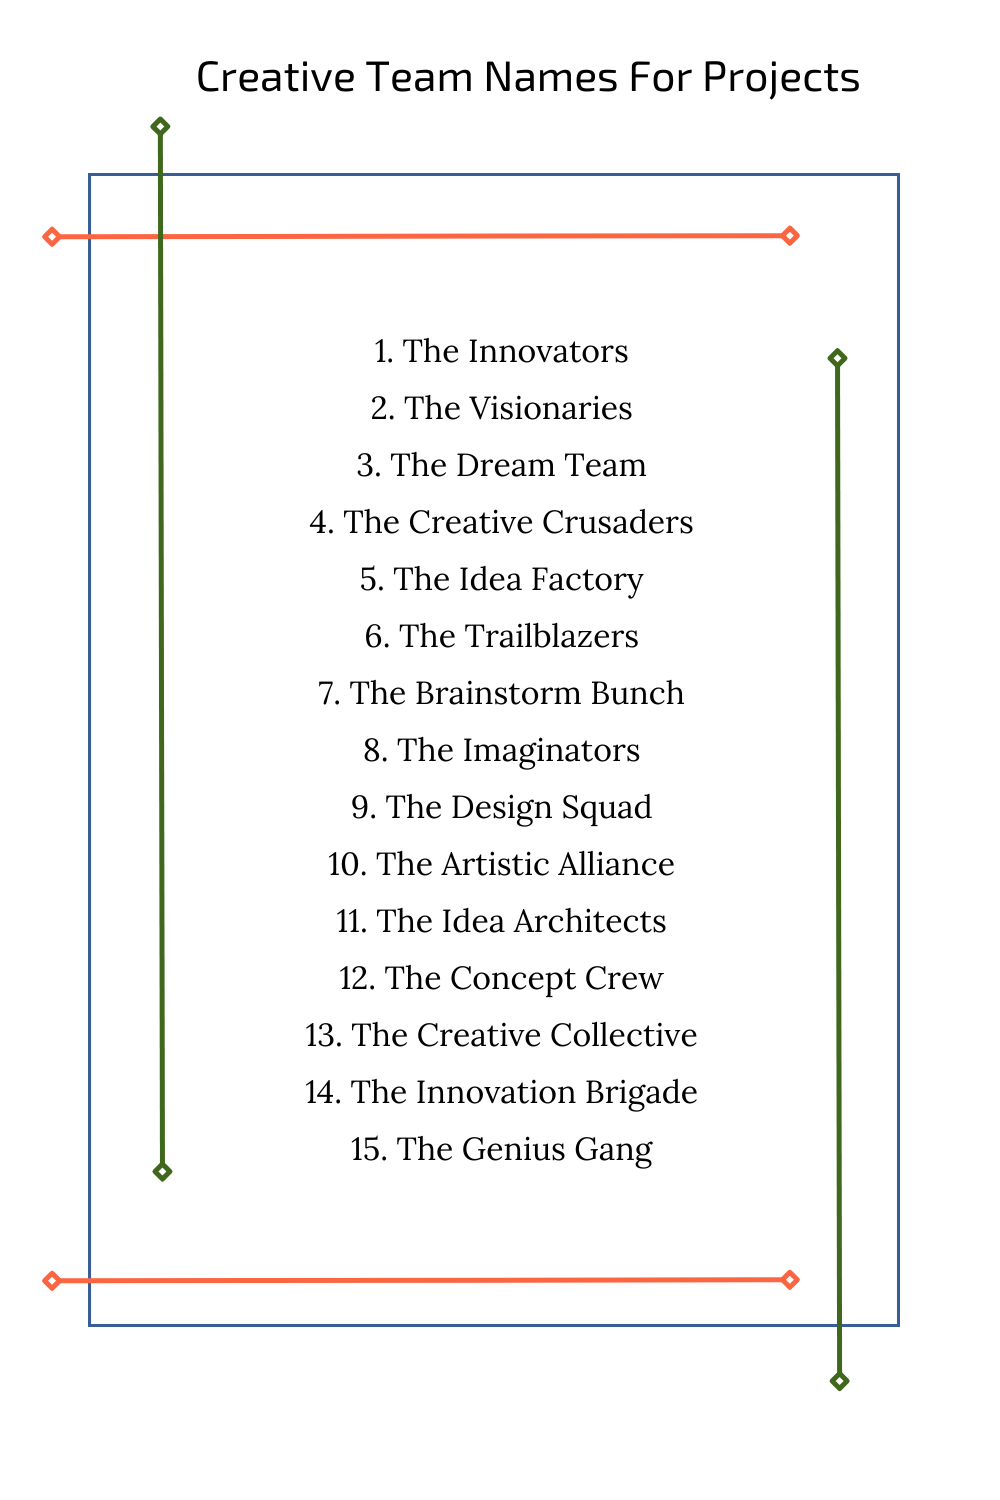 Creative Team Names For Projects